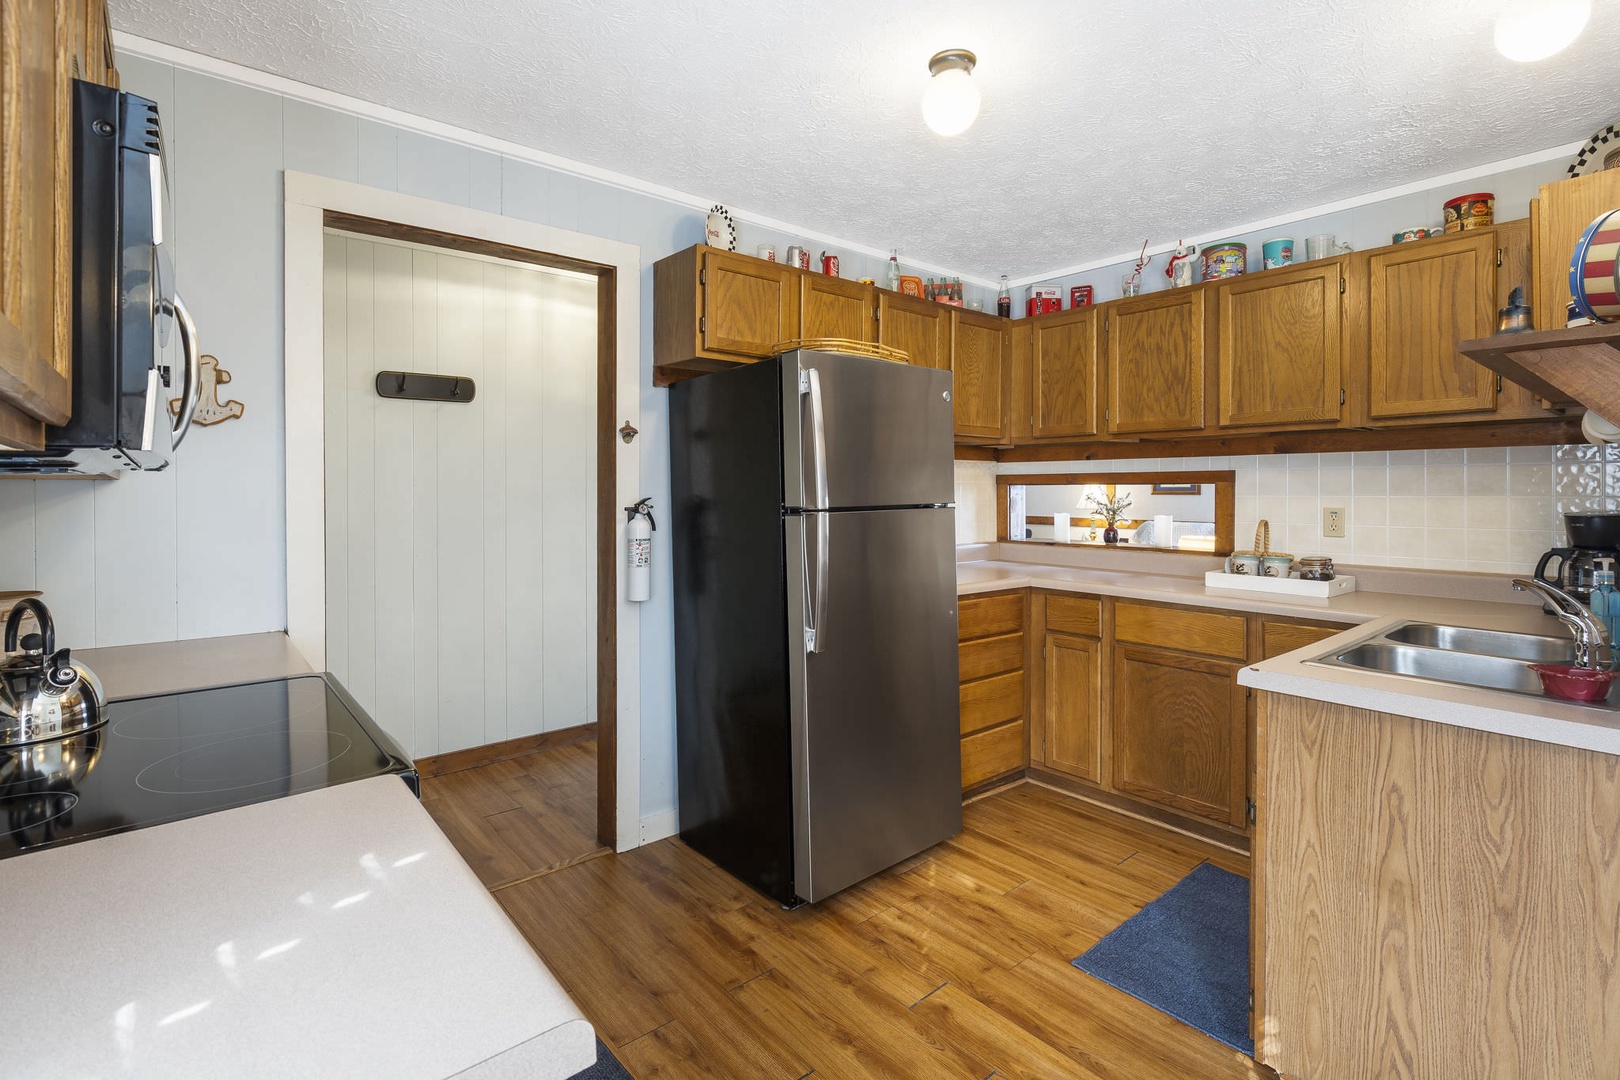 Unit 114 - Fully equipped kitchen